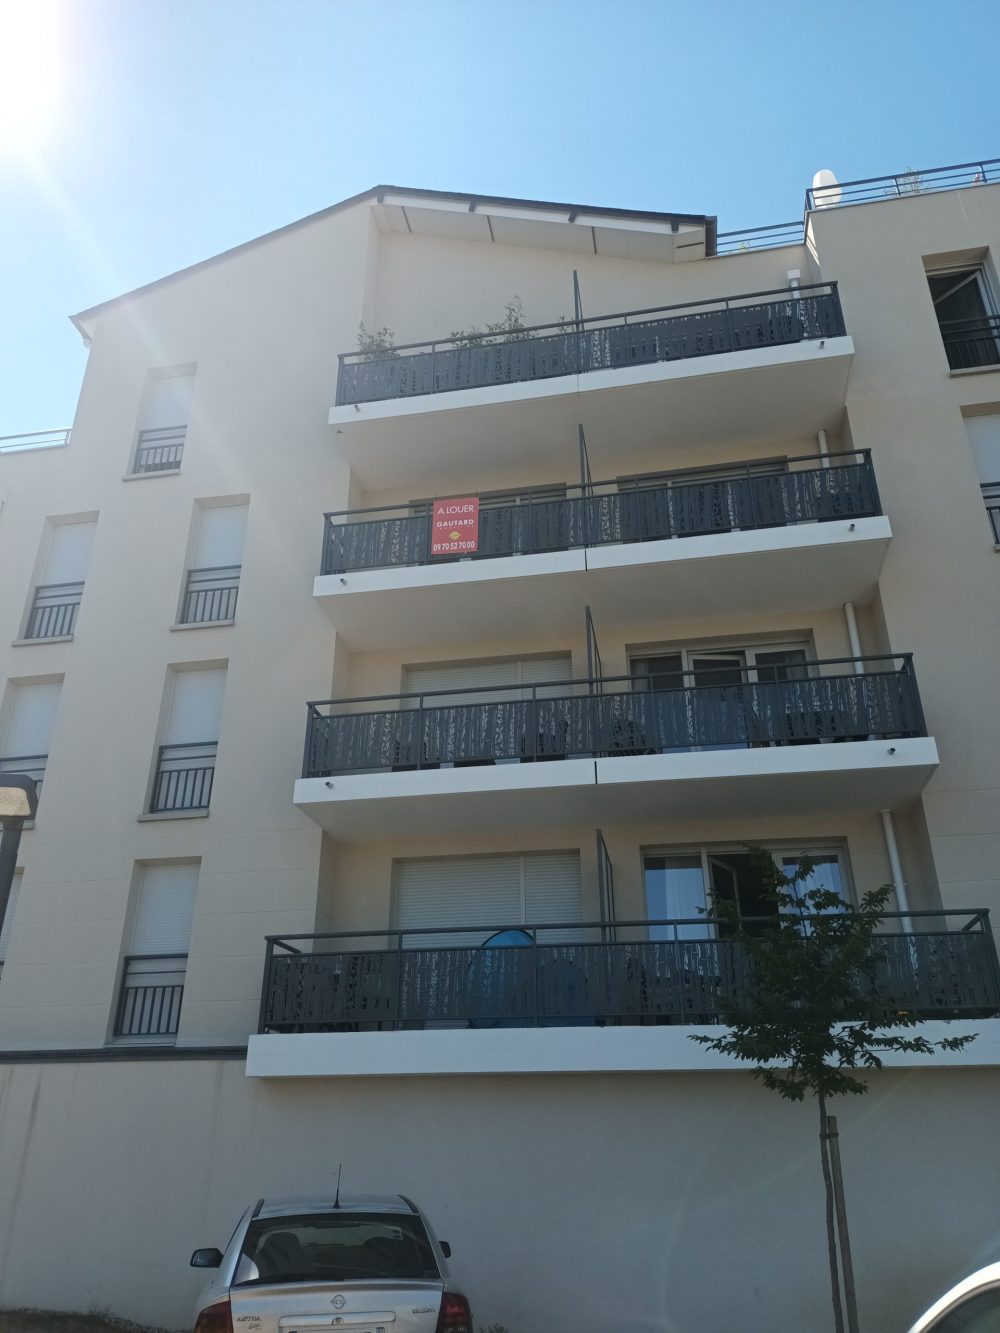 location appartement tours nord t3